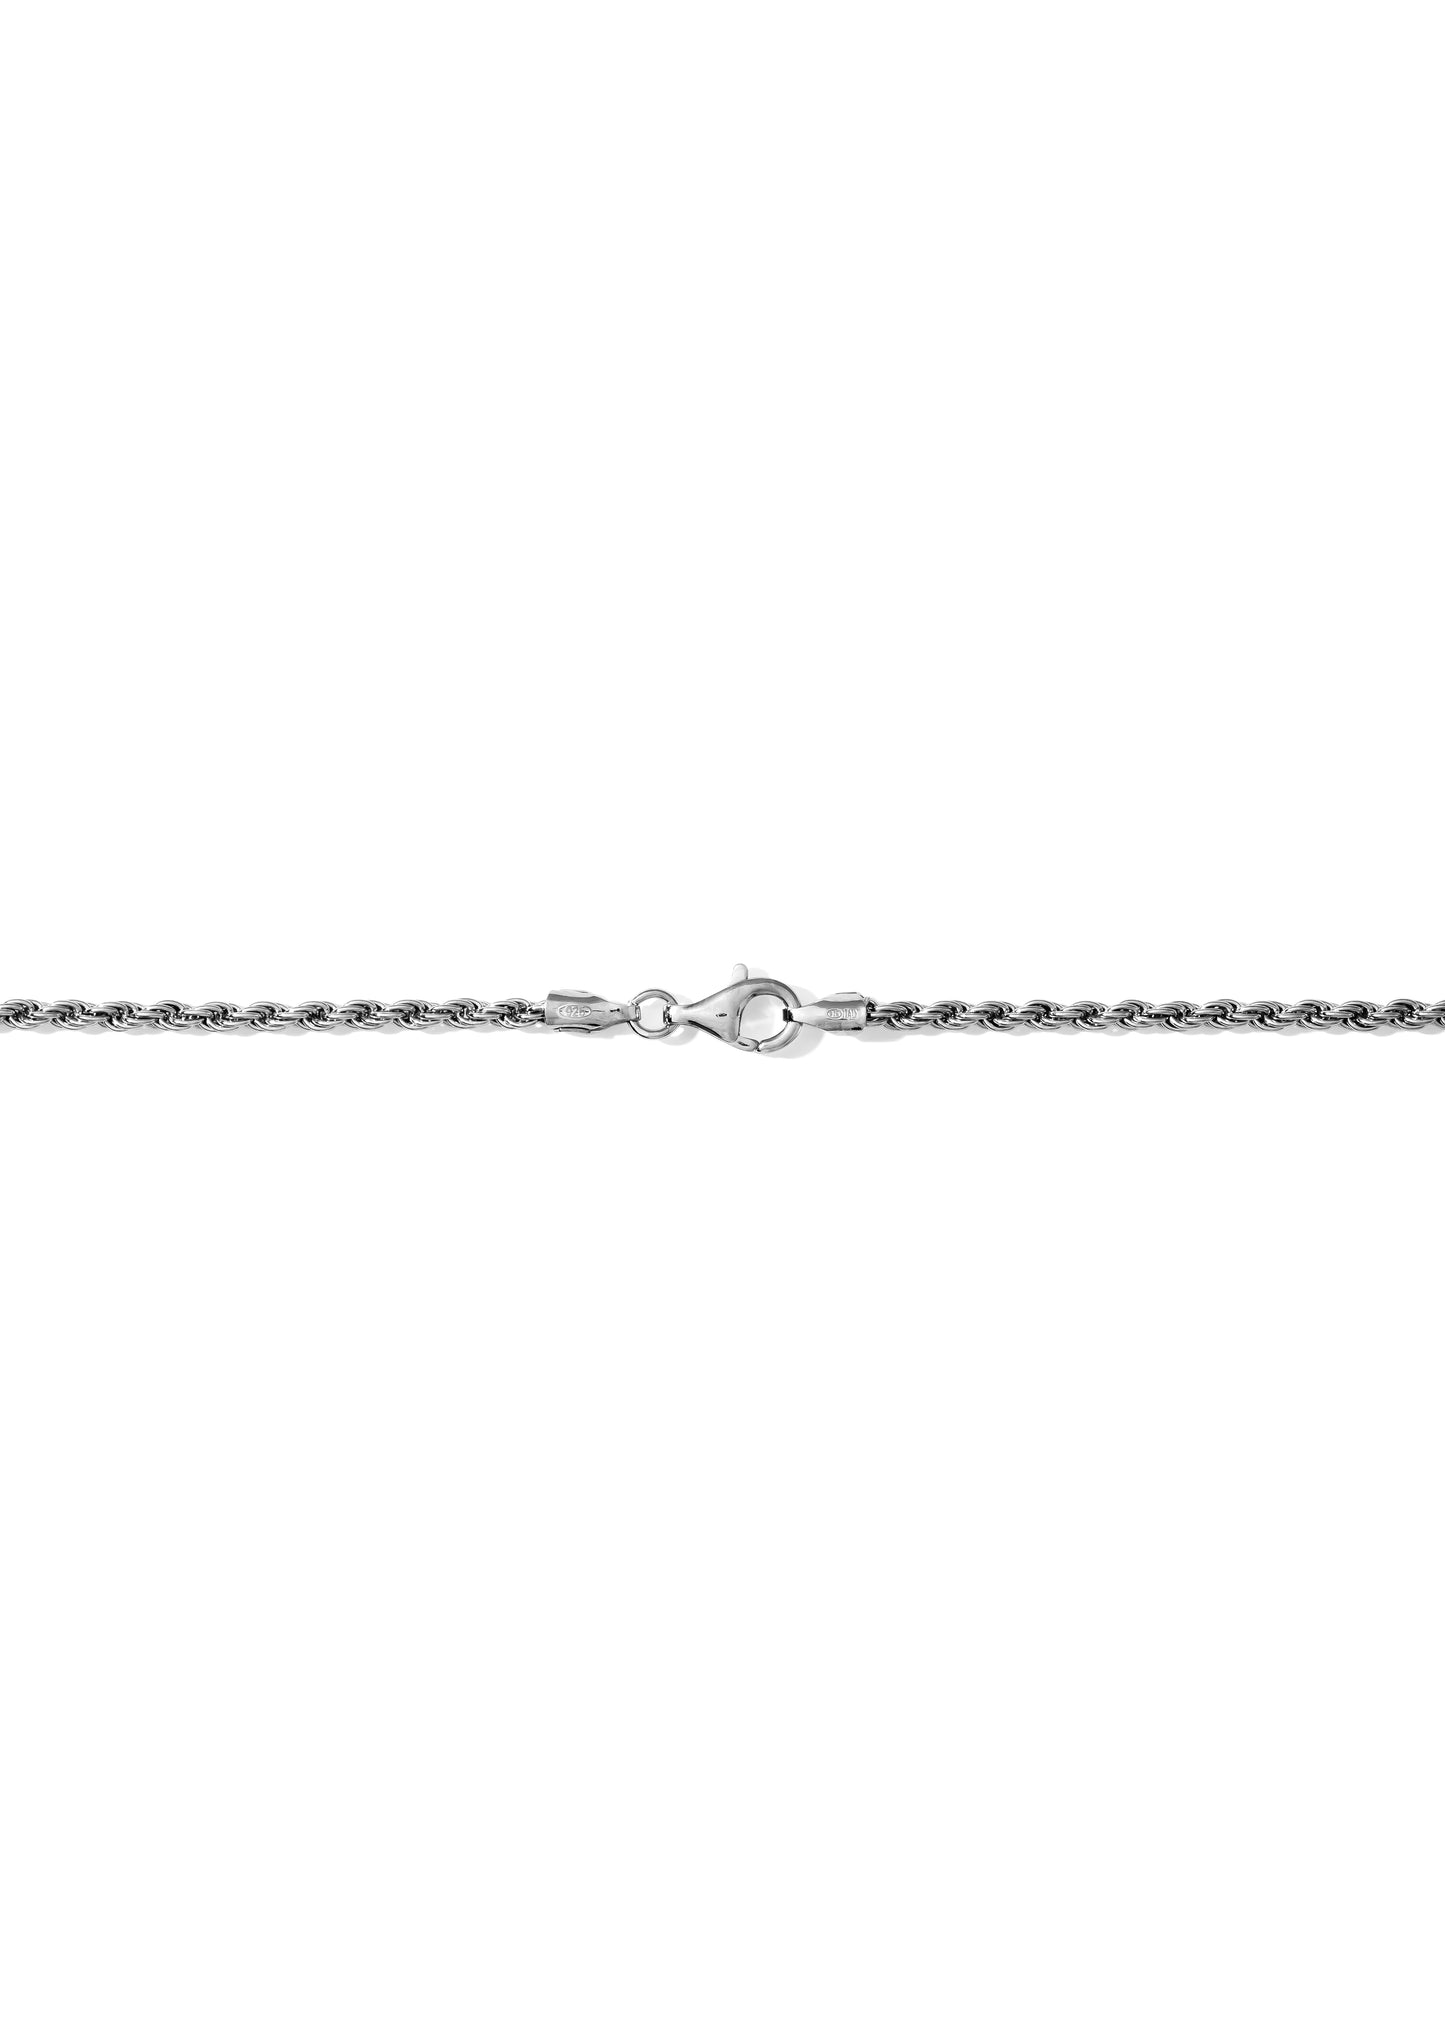 Rope Chain - 3mm